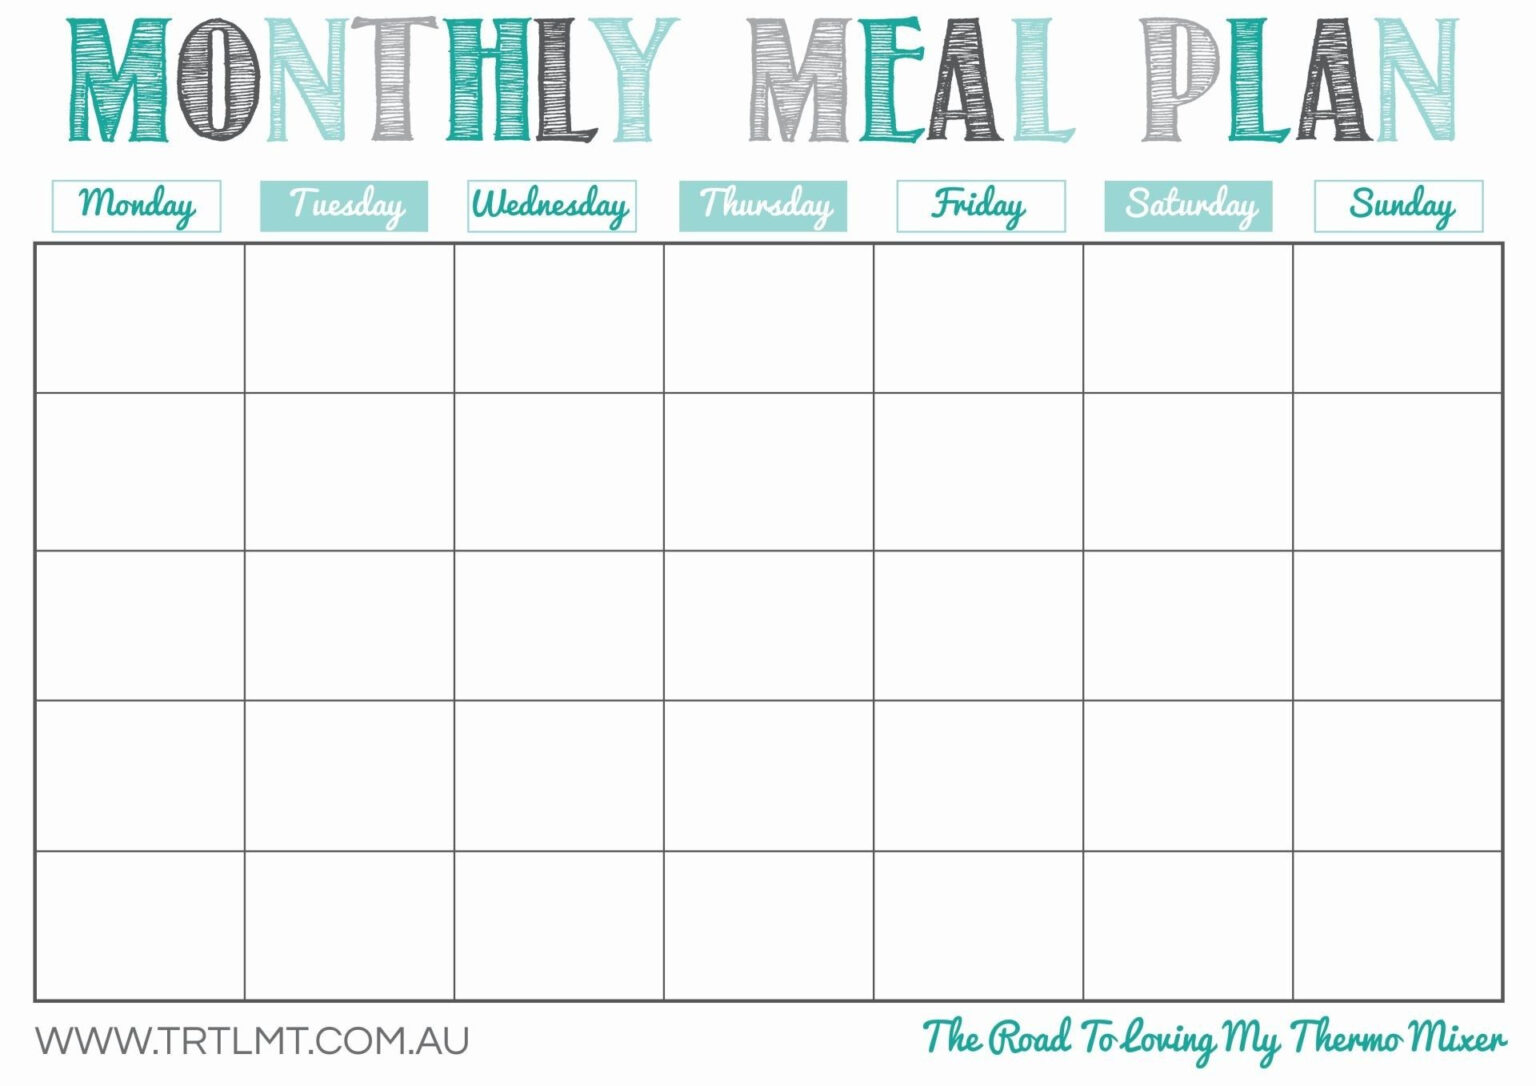 monthly-meal-plan-printable-template-business-psd-excel-intended-for